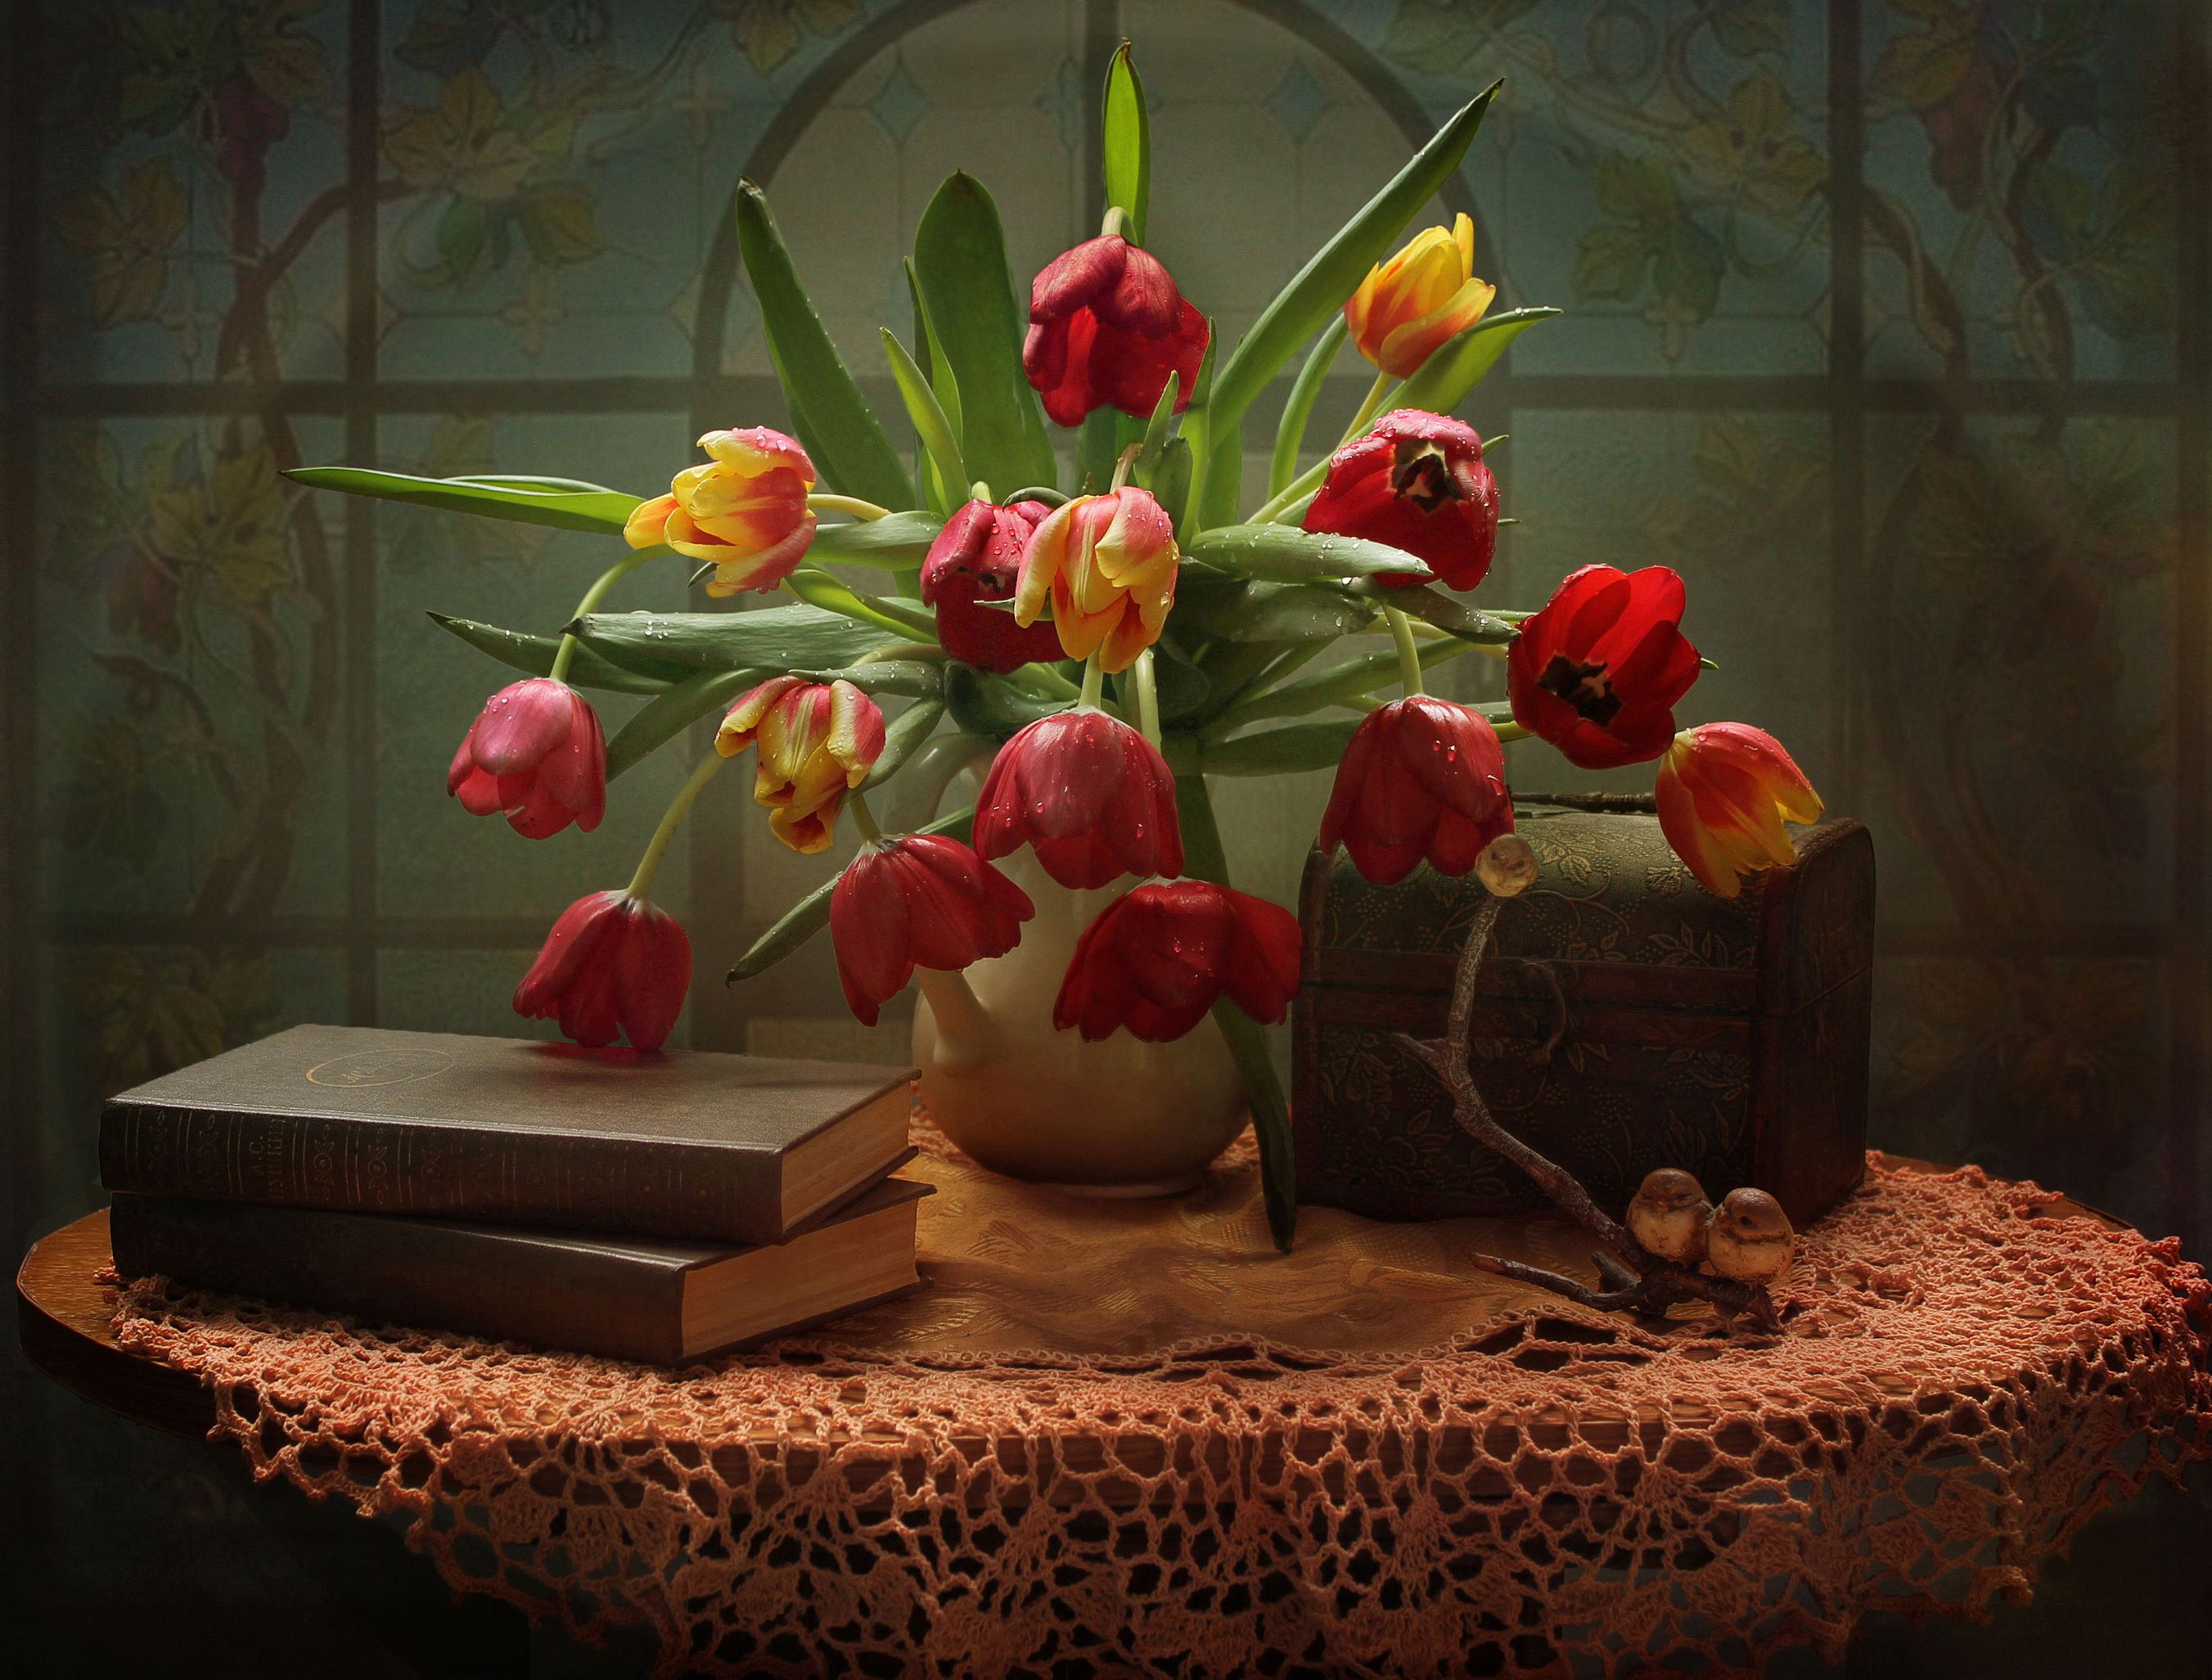 photography, still life, book, chest, red flower, tulip, vase Full HD